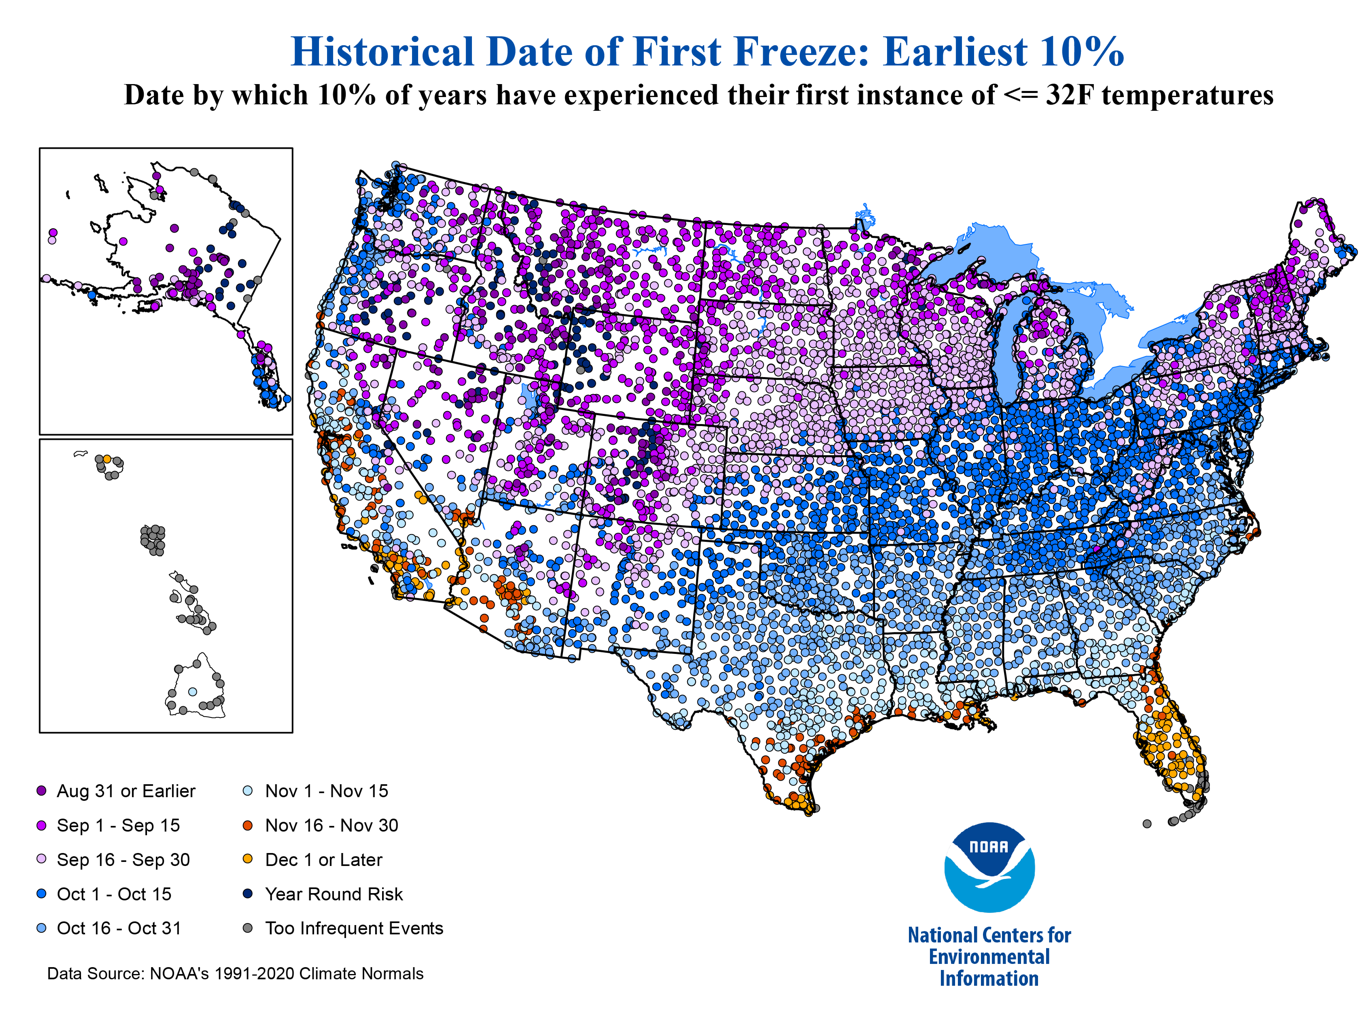 Alt text: A map of the United States with different colored dots and coordinating key to graph the Earliest 10% average date of the first fall freeze based on location.